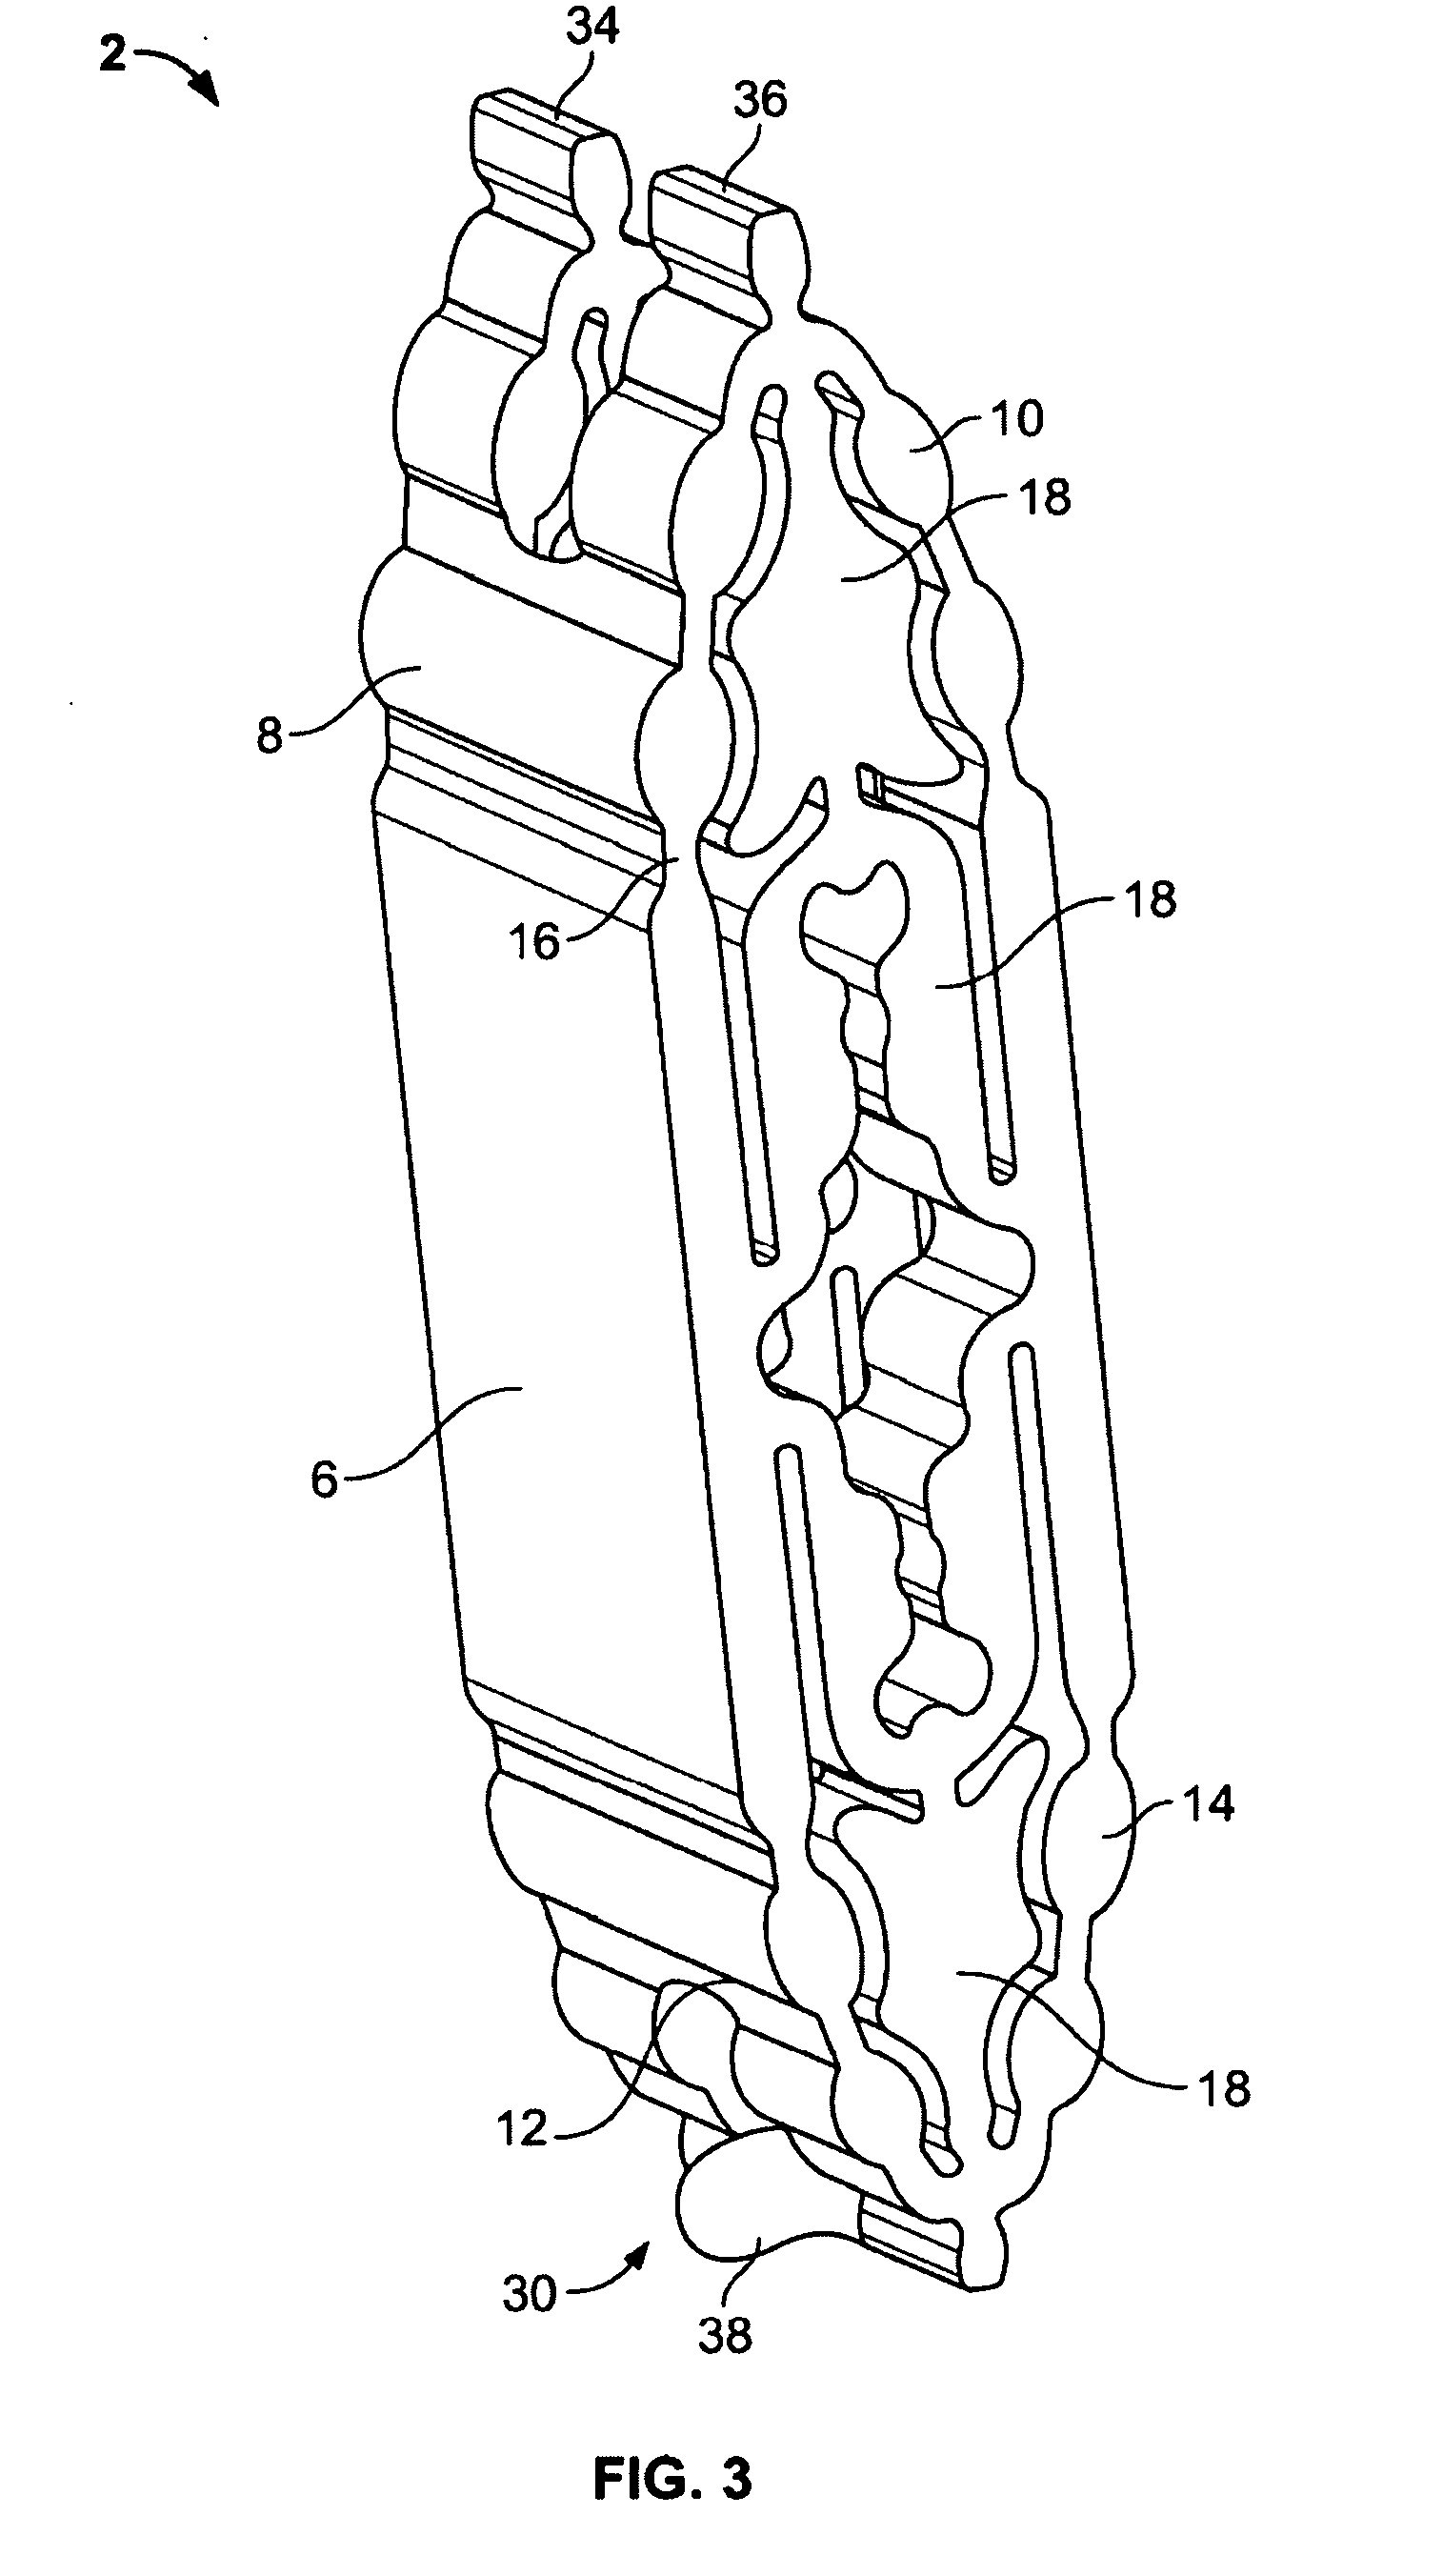 Expandable support device